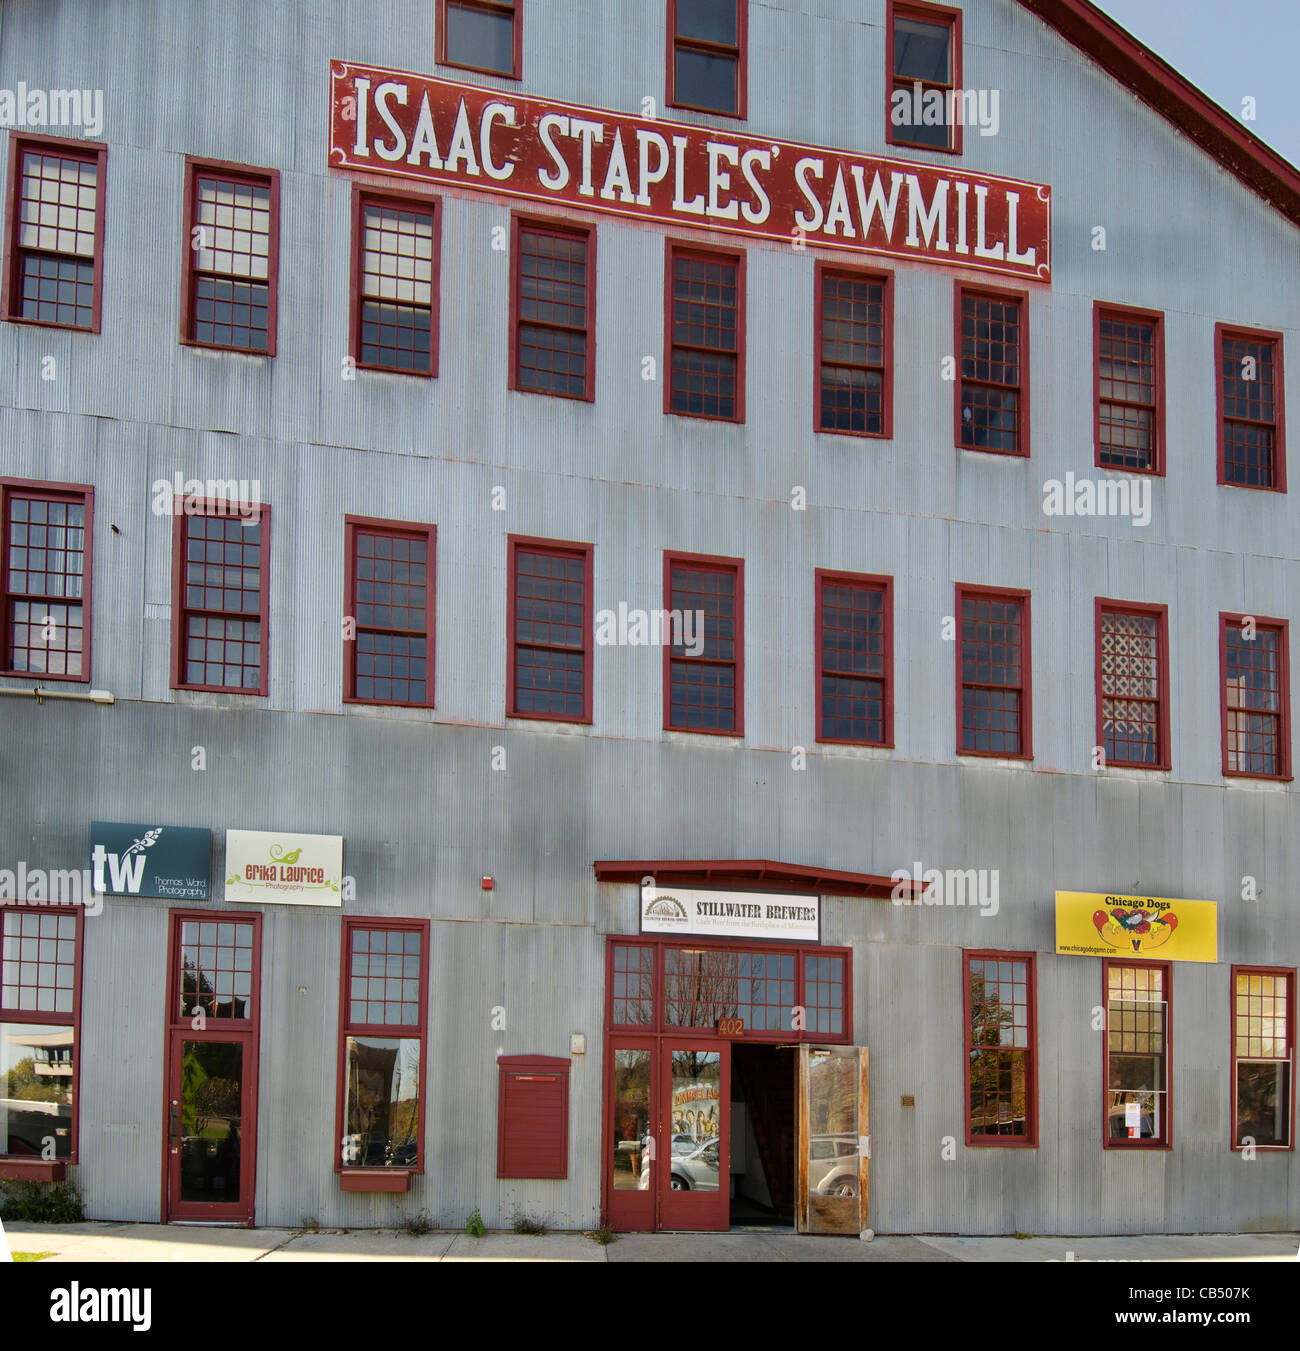 Isaac Staples Sawmill is a shopping mall located in the historic sawmill building in Stillwater, Minnesota Stock Photo